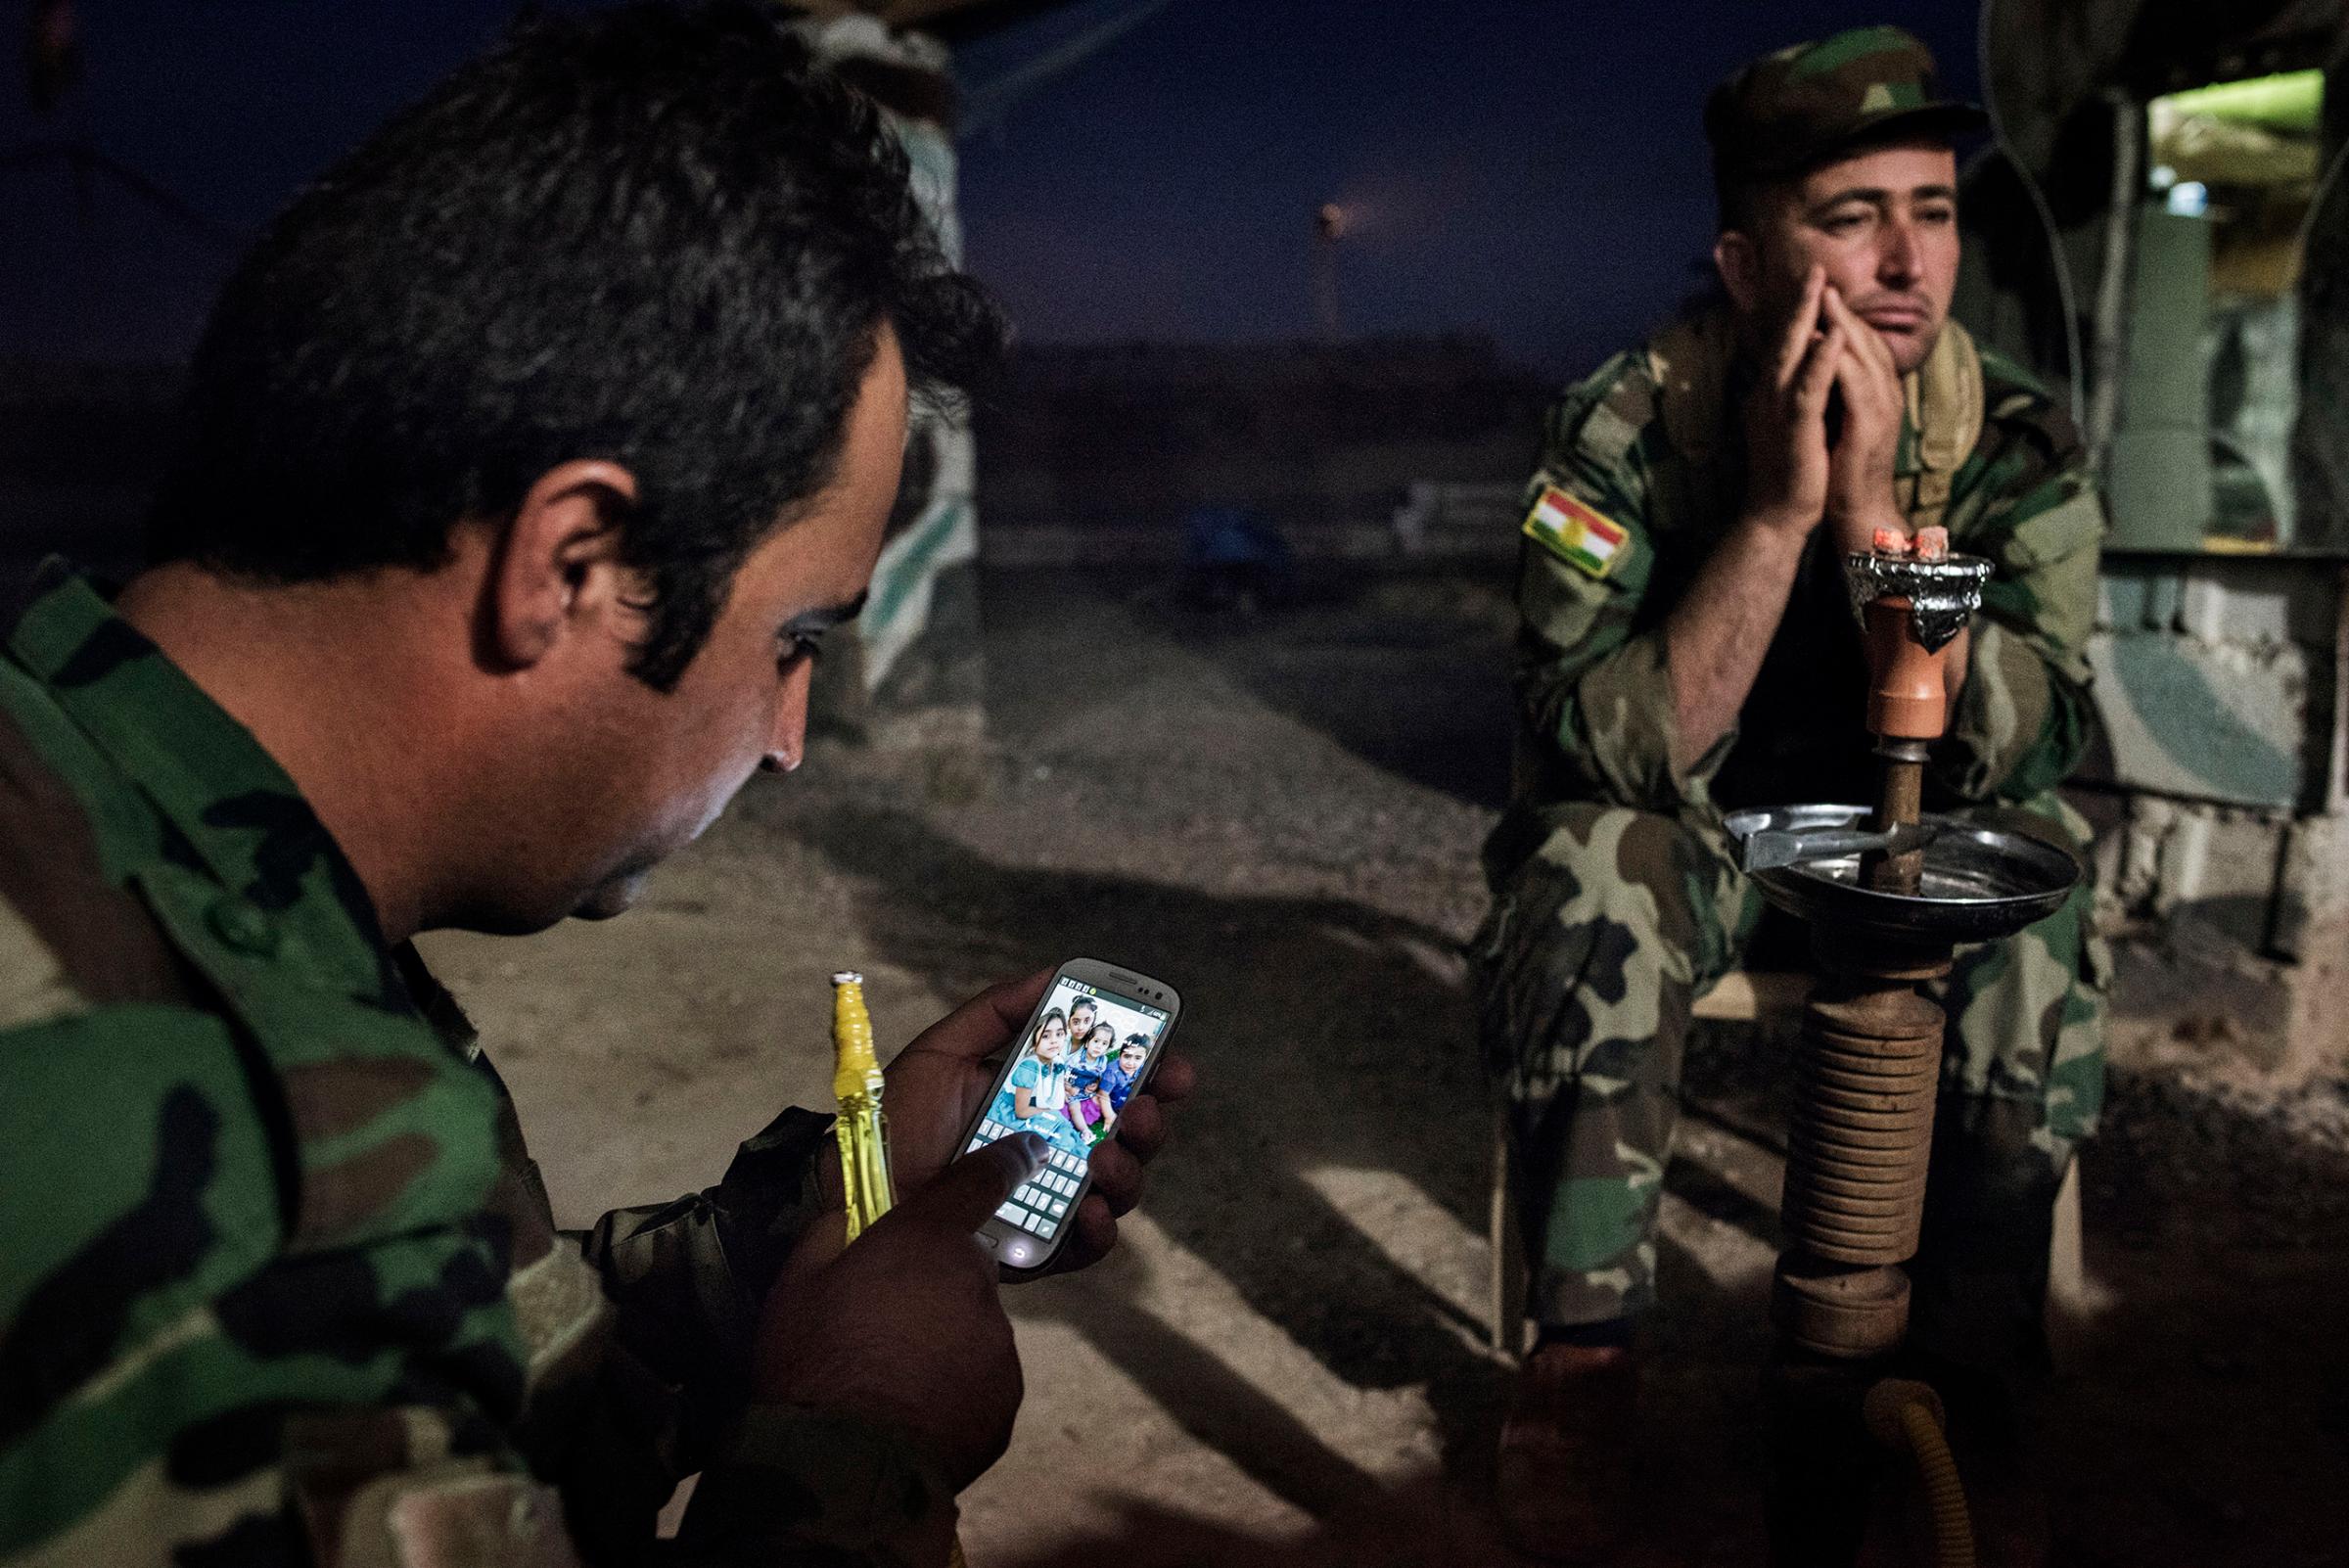 Sgt. Farsal Goran looks at his cellphone as he sits with Majid Hamid, 32, while shisha is smoked at the front outside Makhmour, Iraq, May 8, 2016.